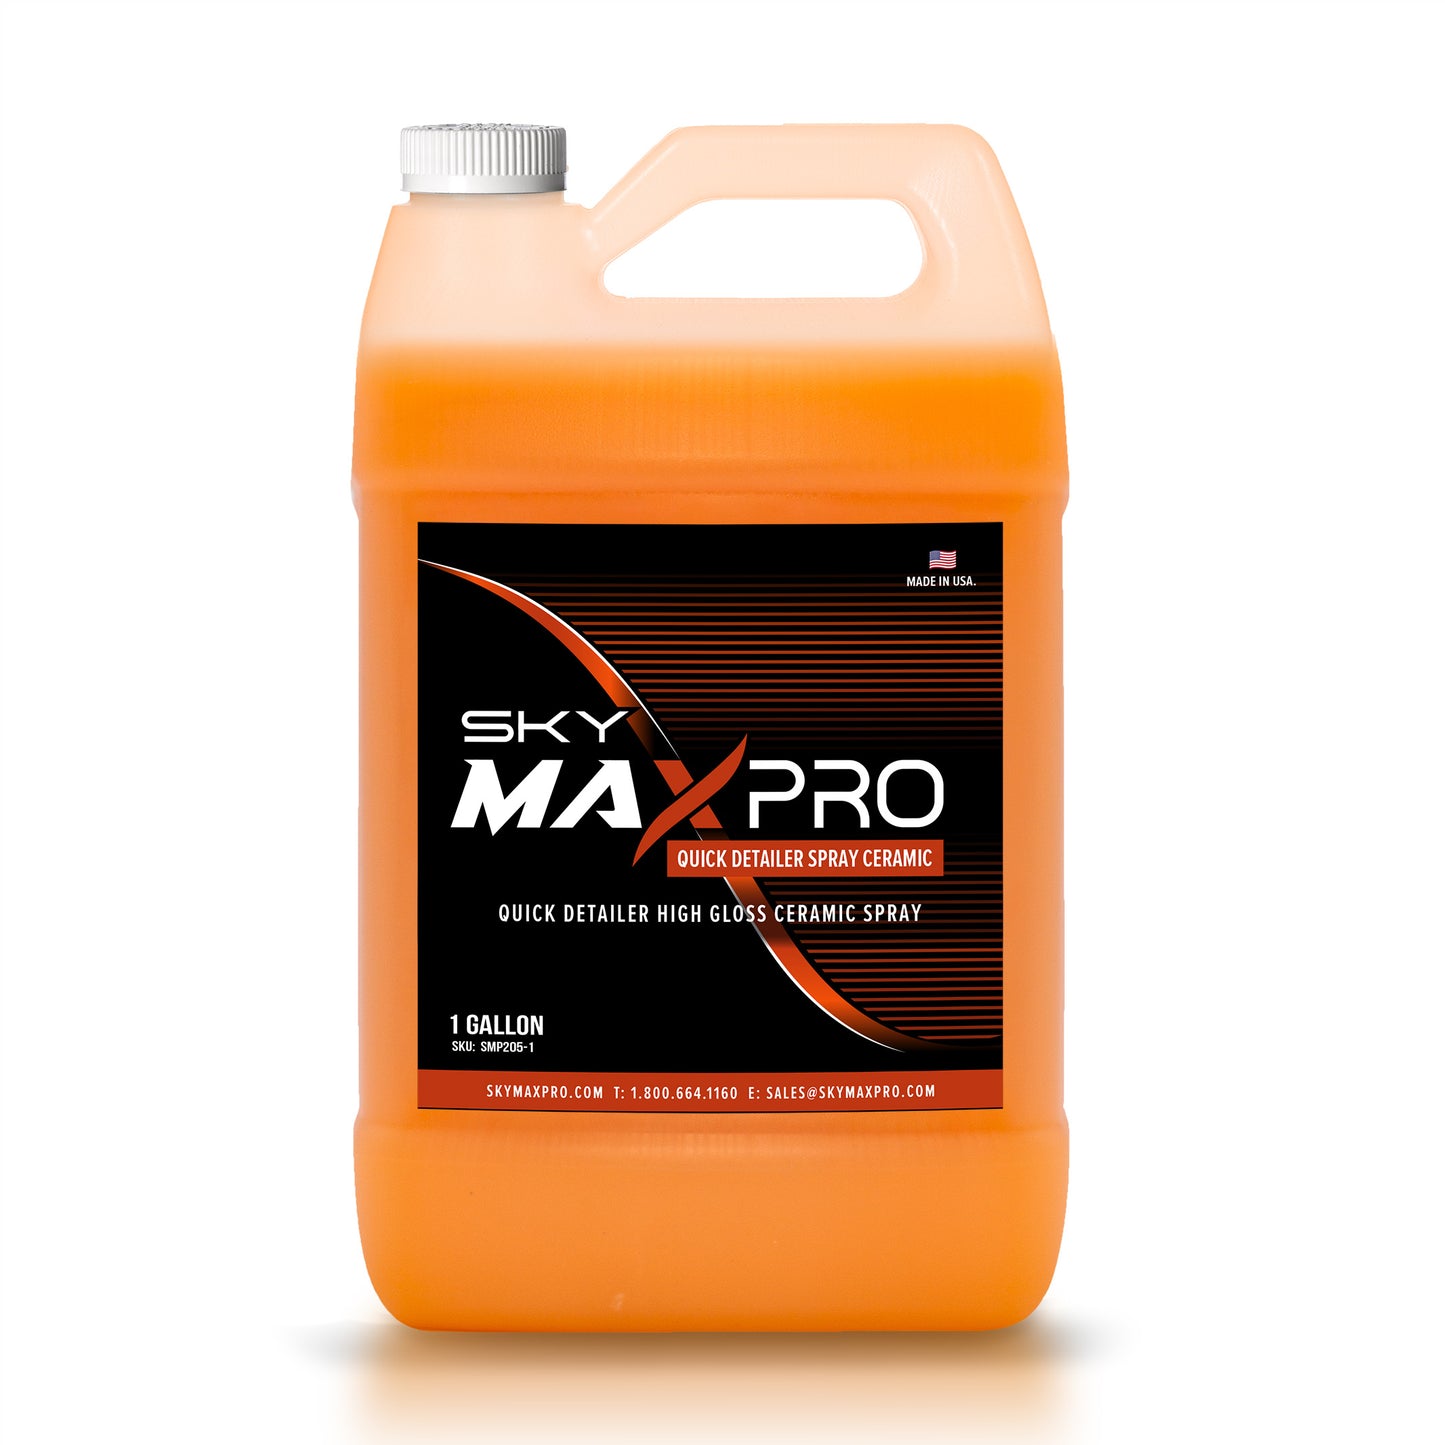 SKYMAXPRO QUICK DETAILER SPRAY HIGH GLOSS WITH CERAMIC FINISH